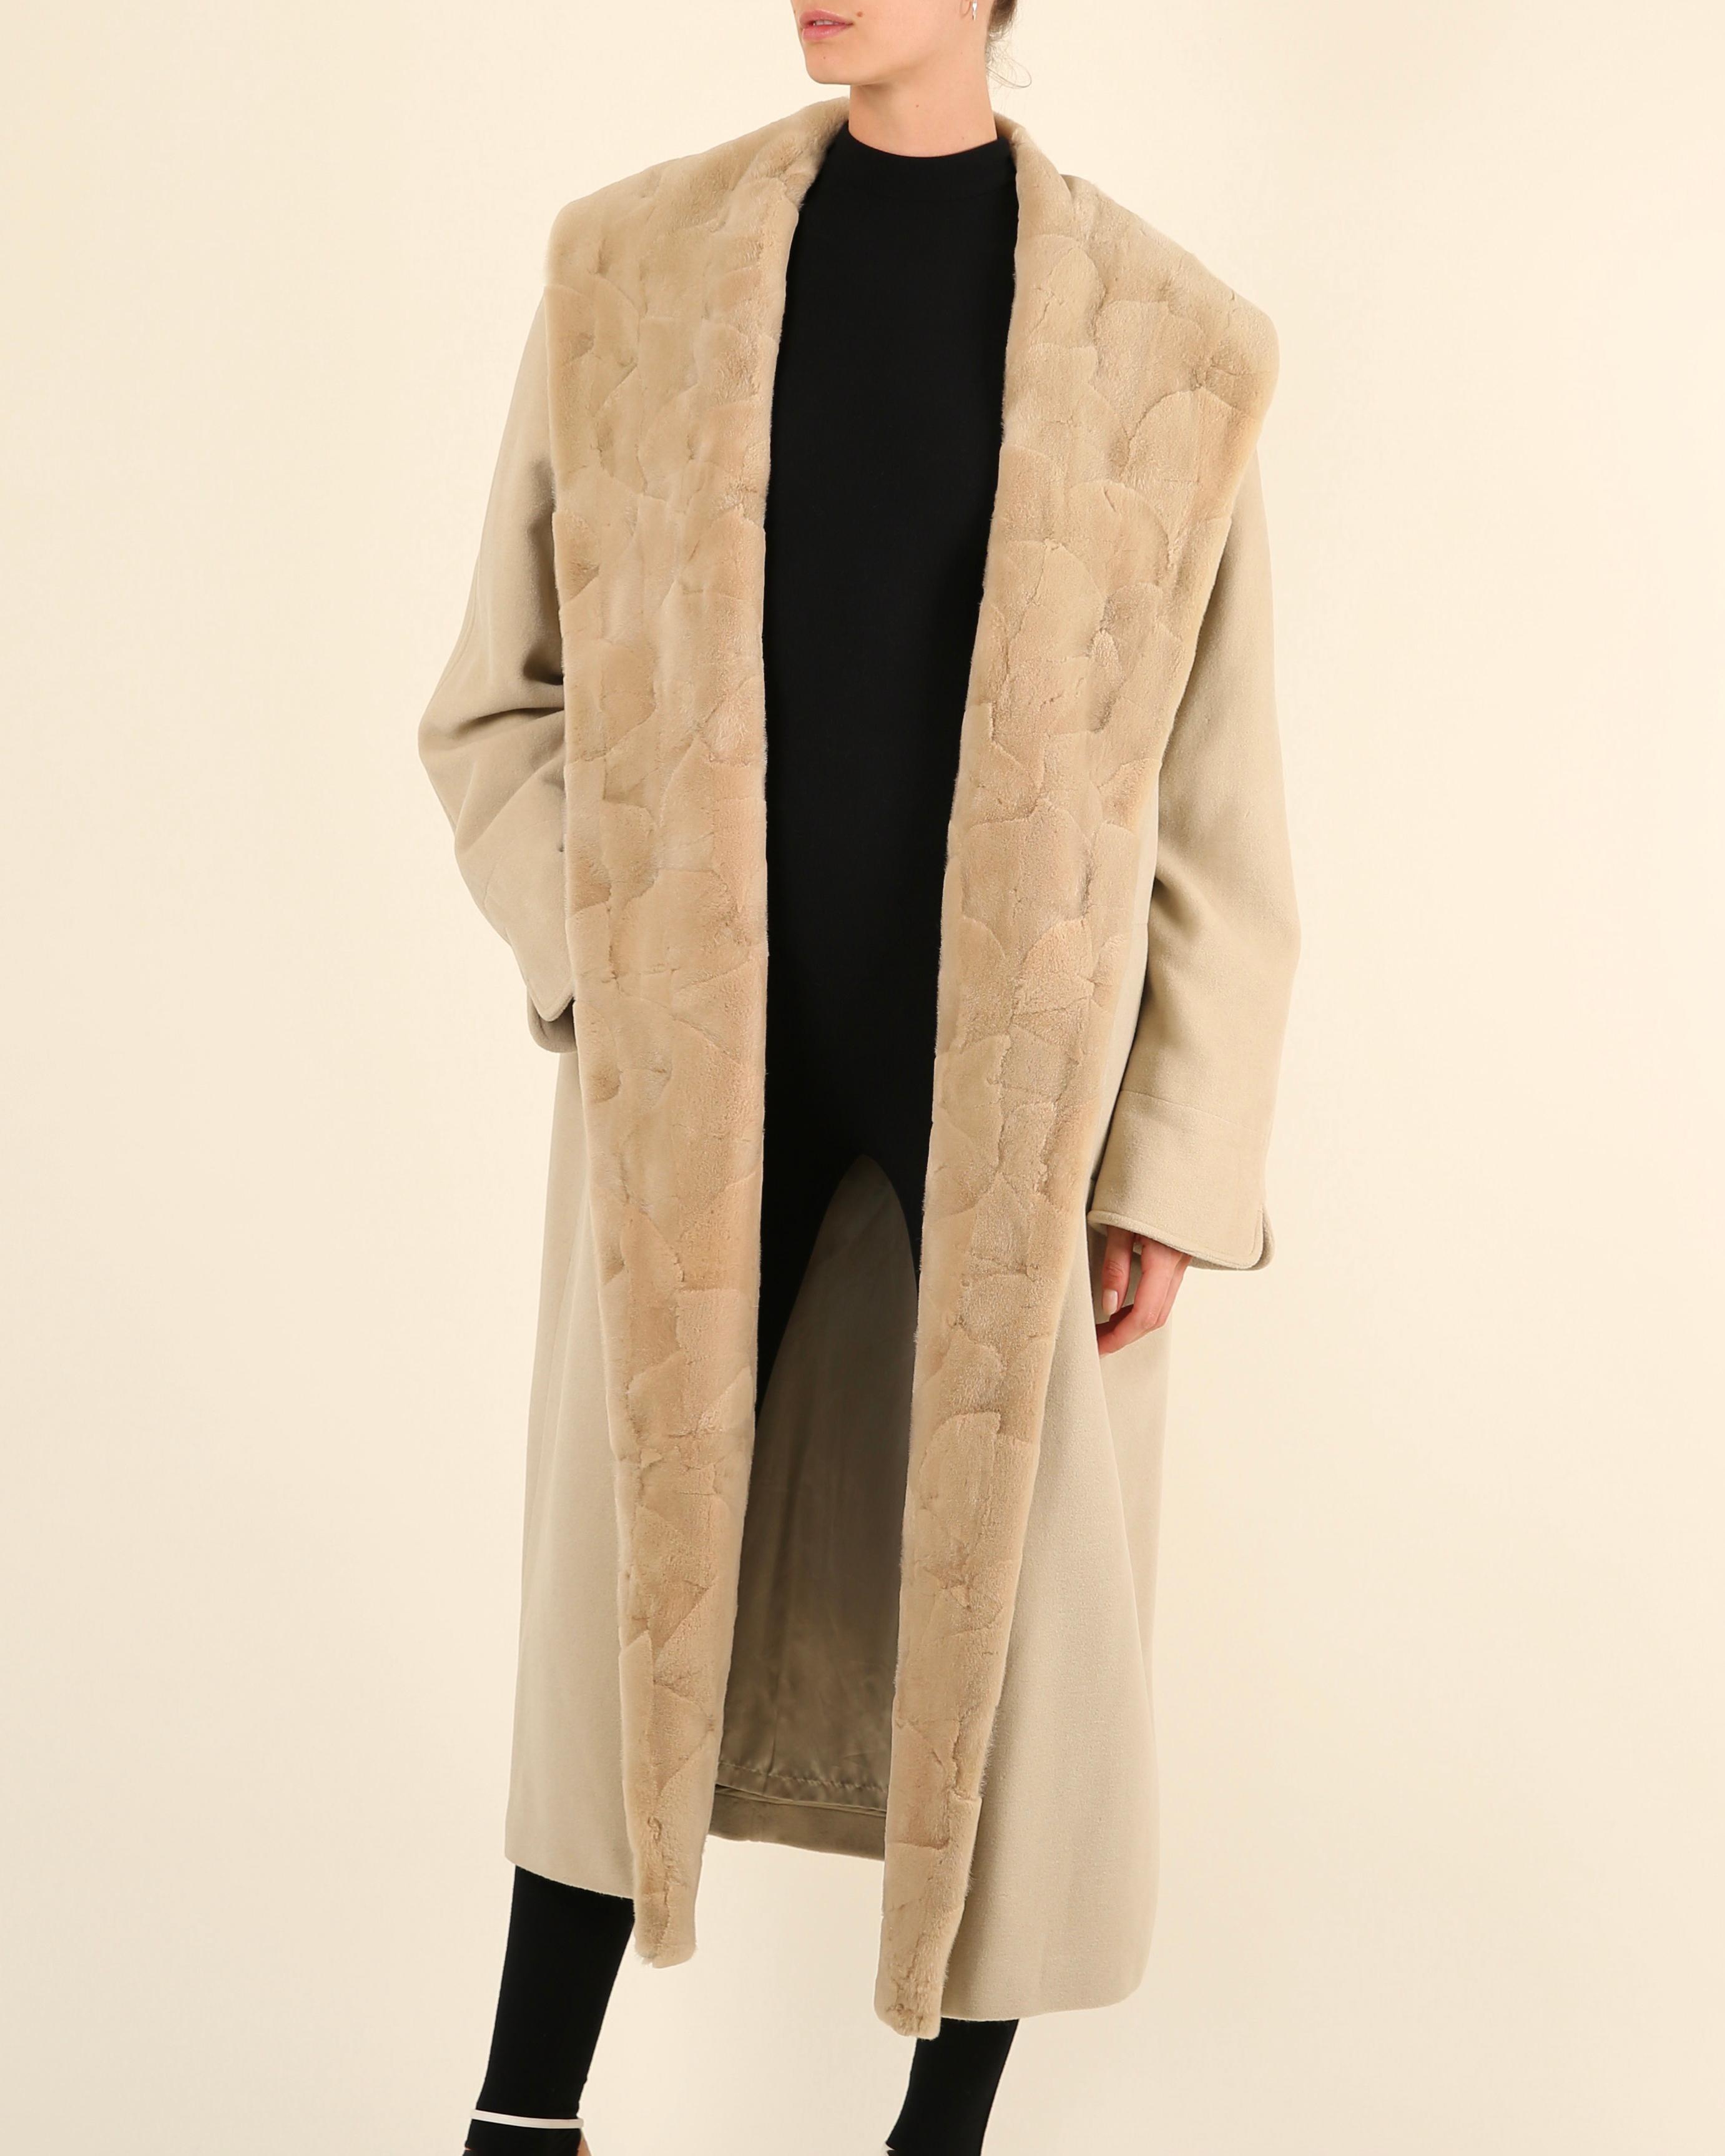 LOVE LALI Vintage

Louis Féraud vintage shawl fur collar coat in pale beige (sand)
Open oversized fit. Due to its cut this would work wonderfully for many sizes, depending on the desired fit. 
Lightly padded shoulders
Estimated to be from the late